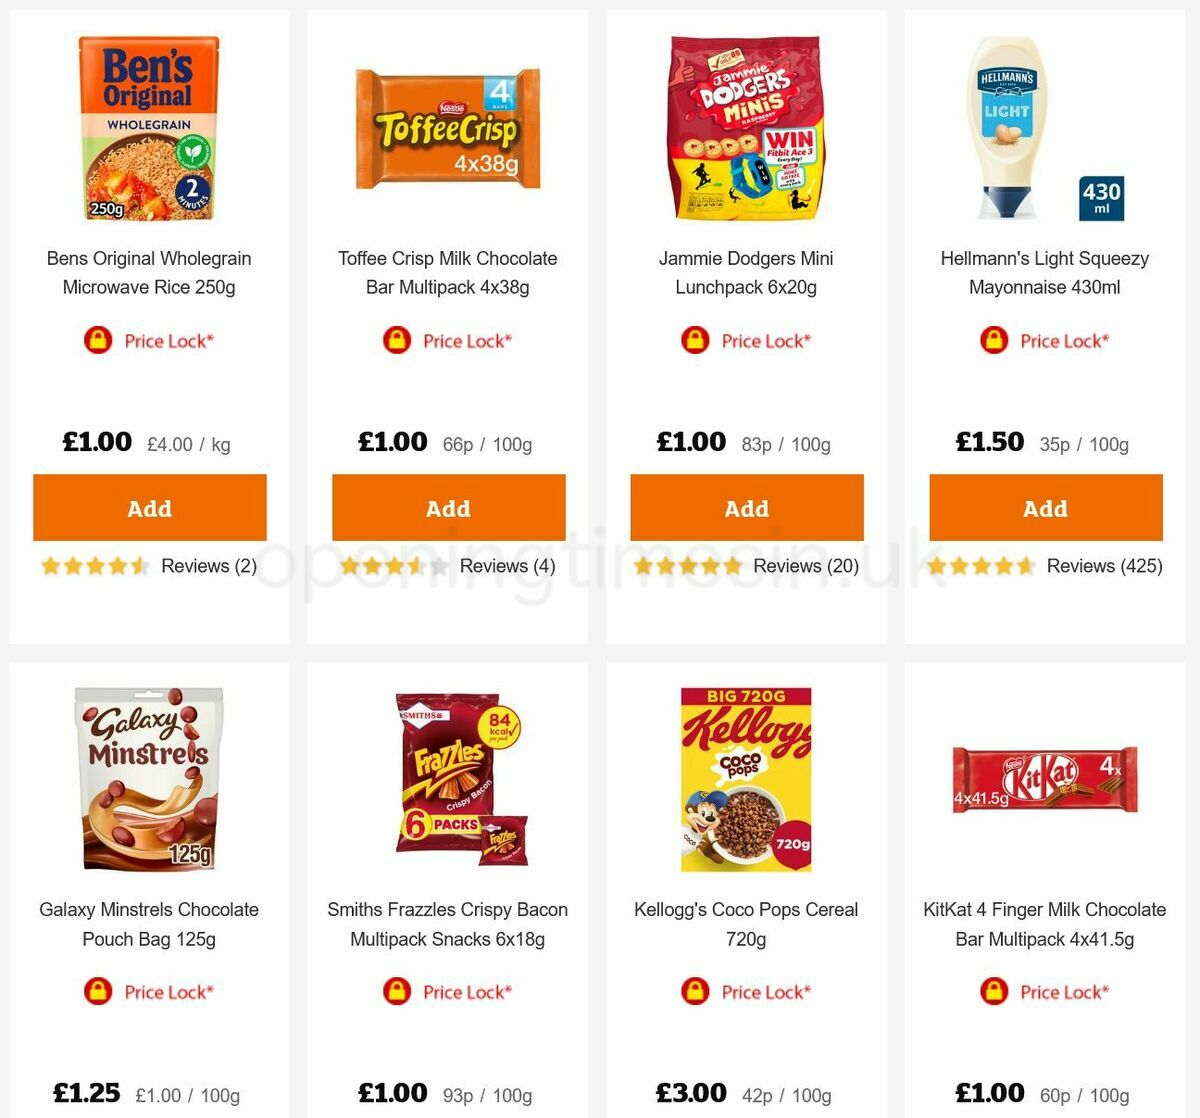 Sainsbury's Offers from 1 October